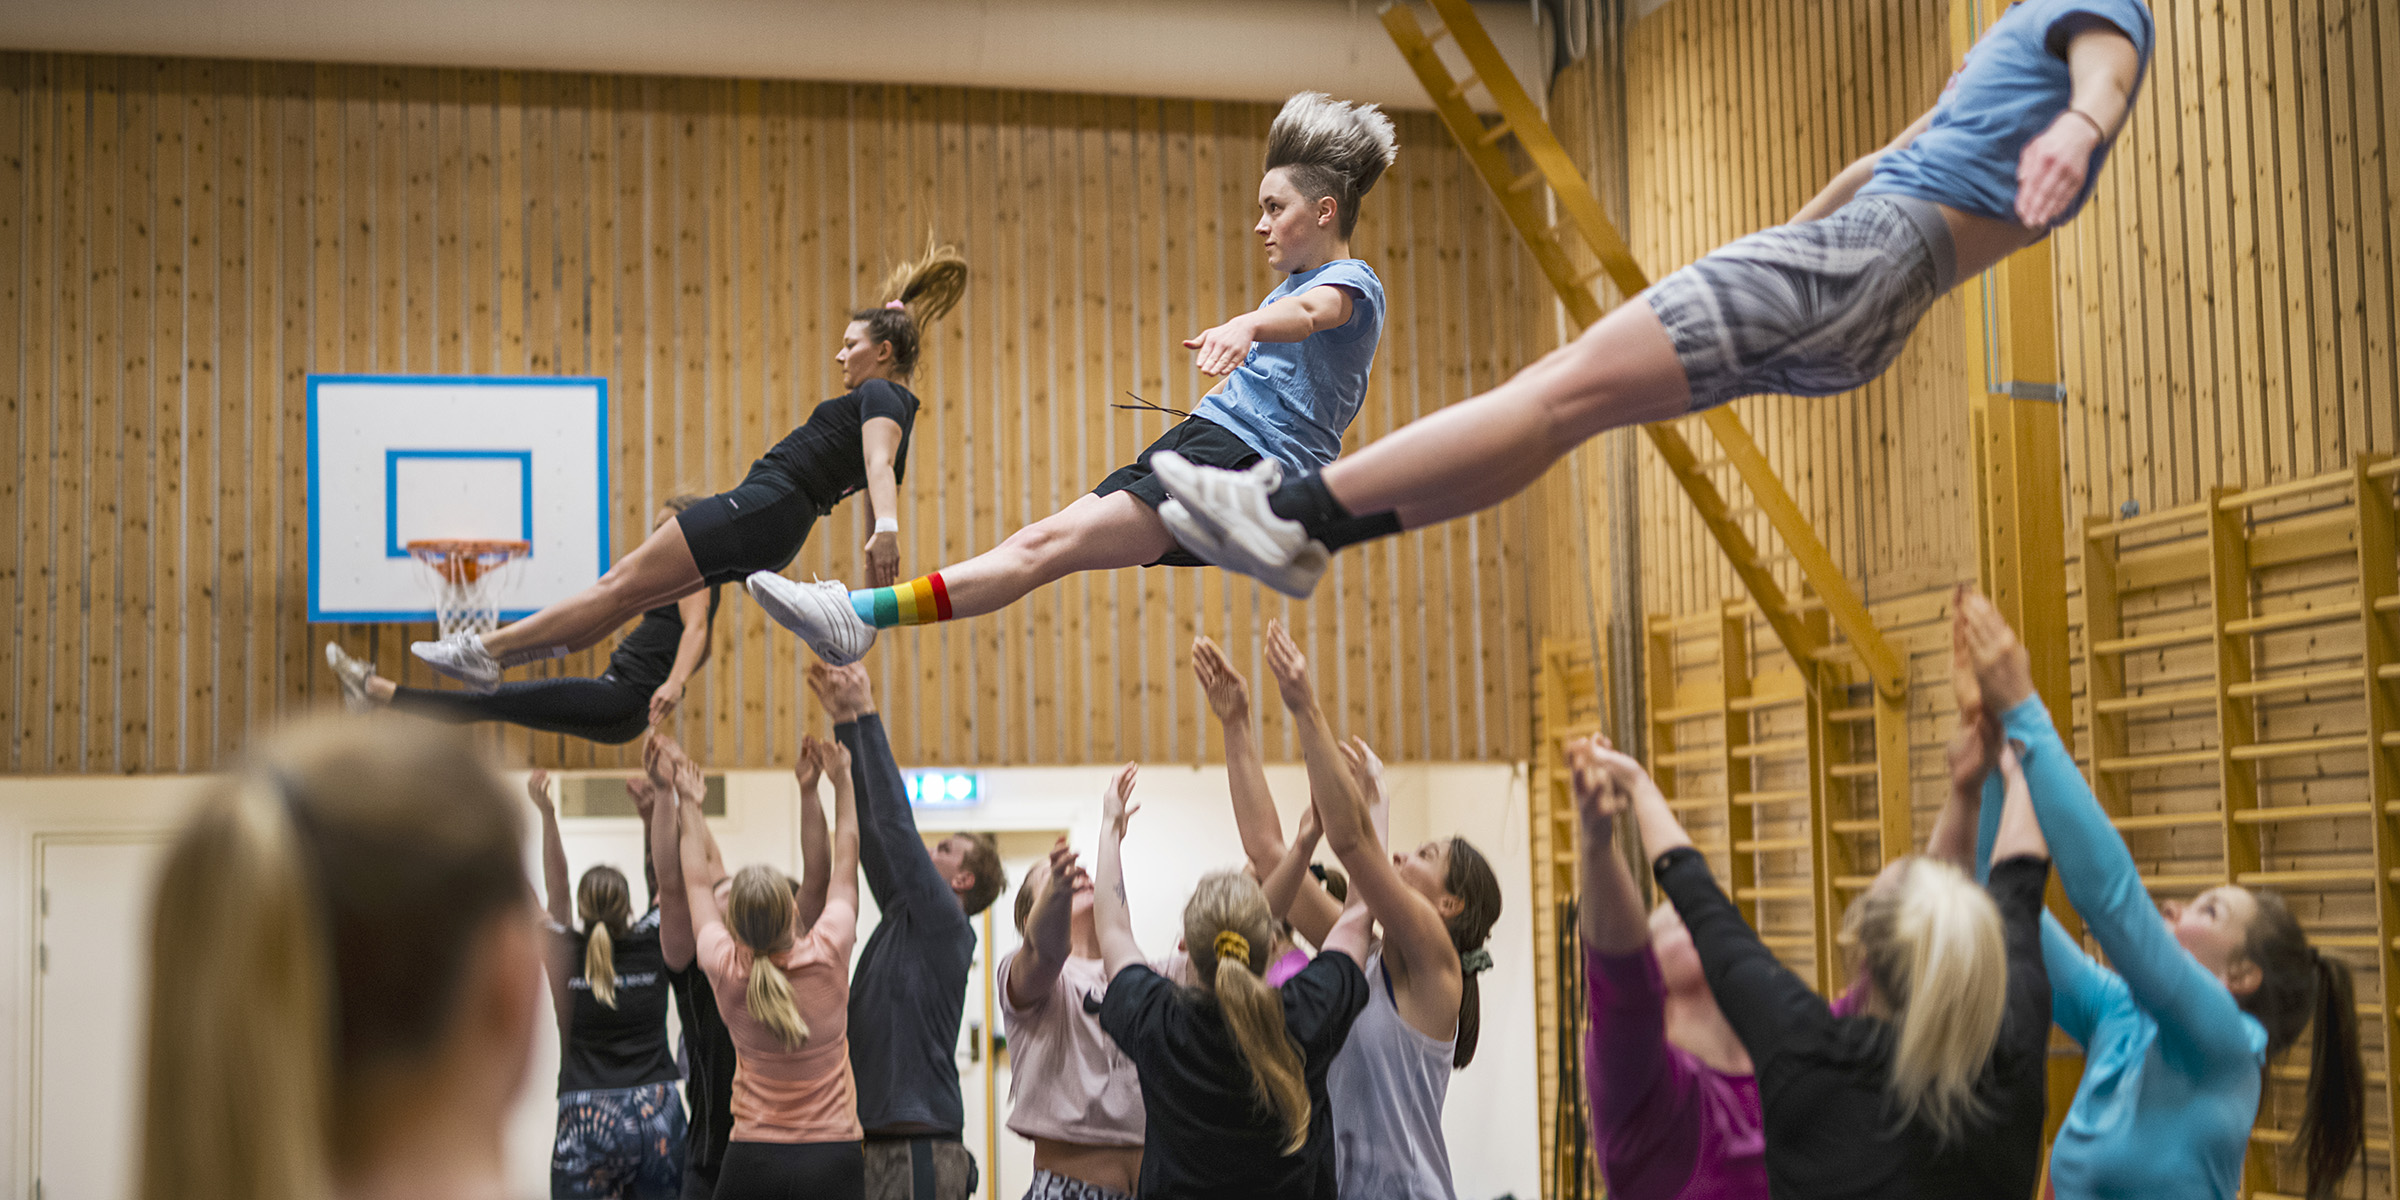 A large group of people practice acrobatics in a gymnasium. Together they throw three people into the air.